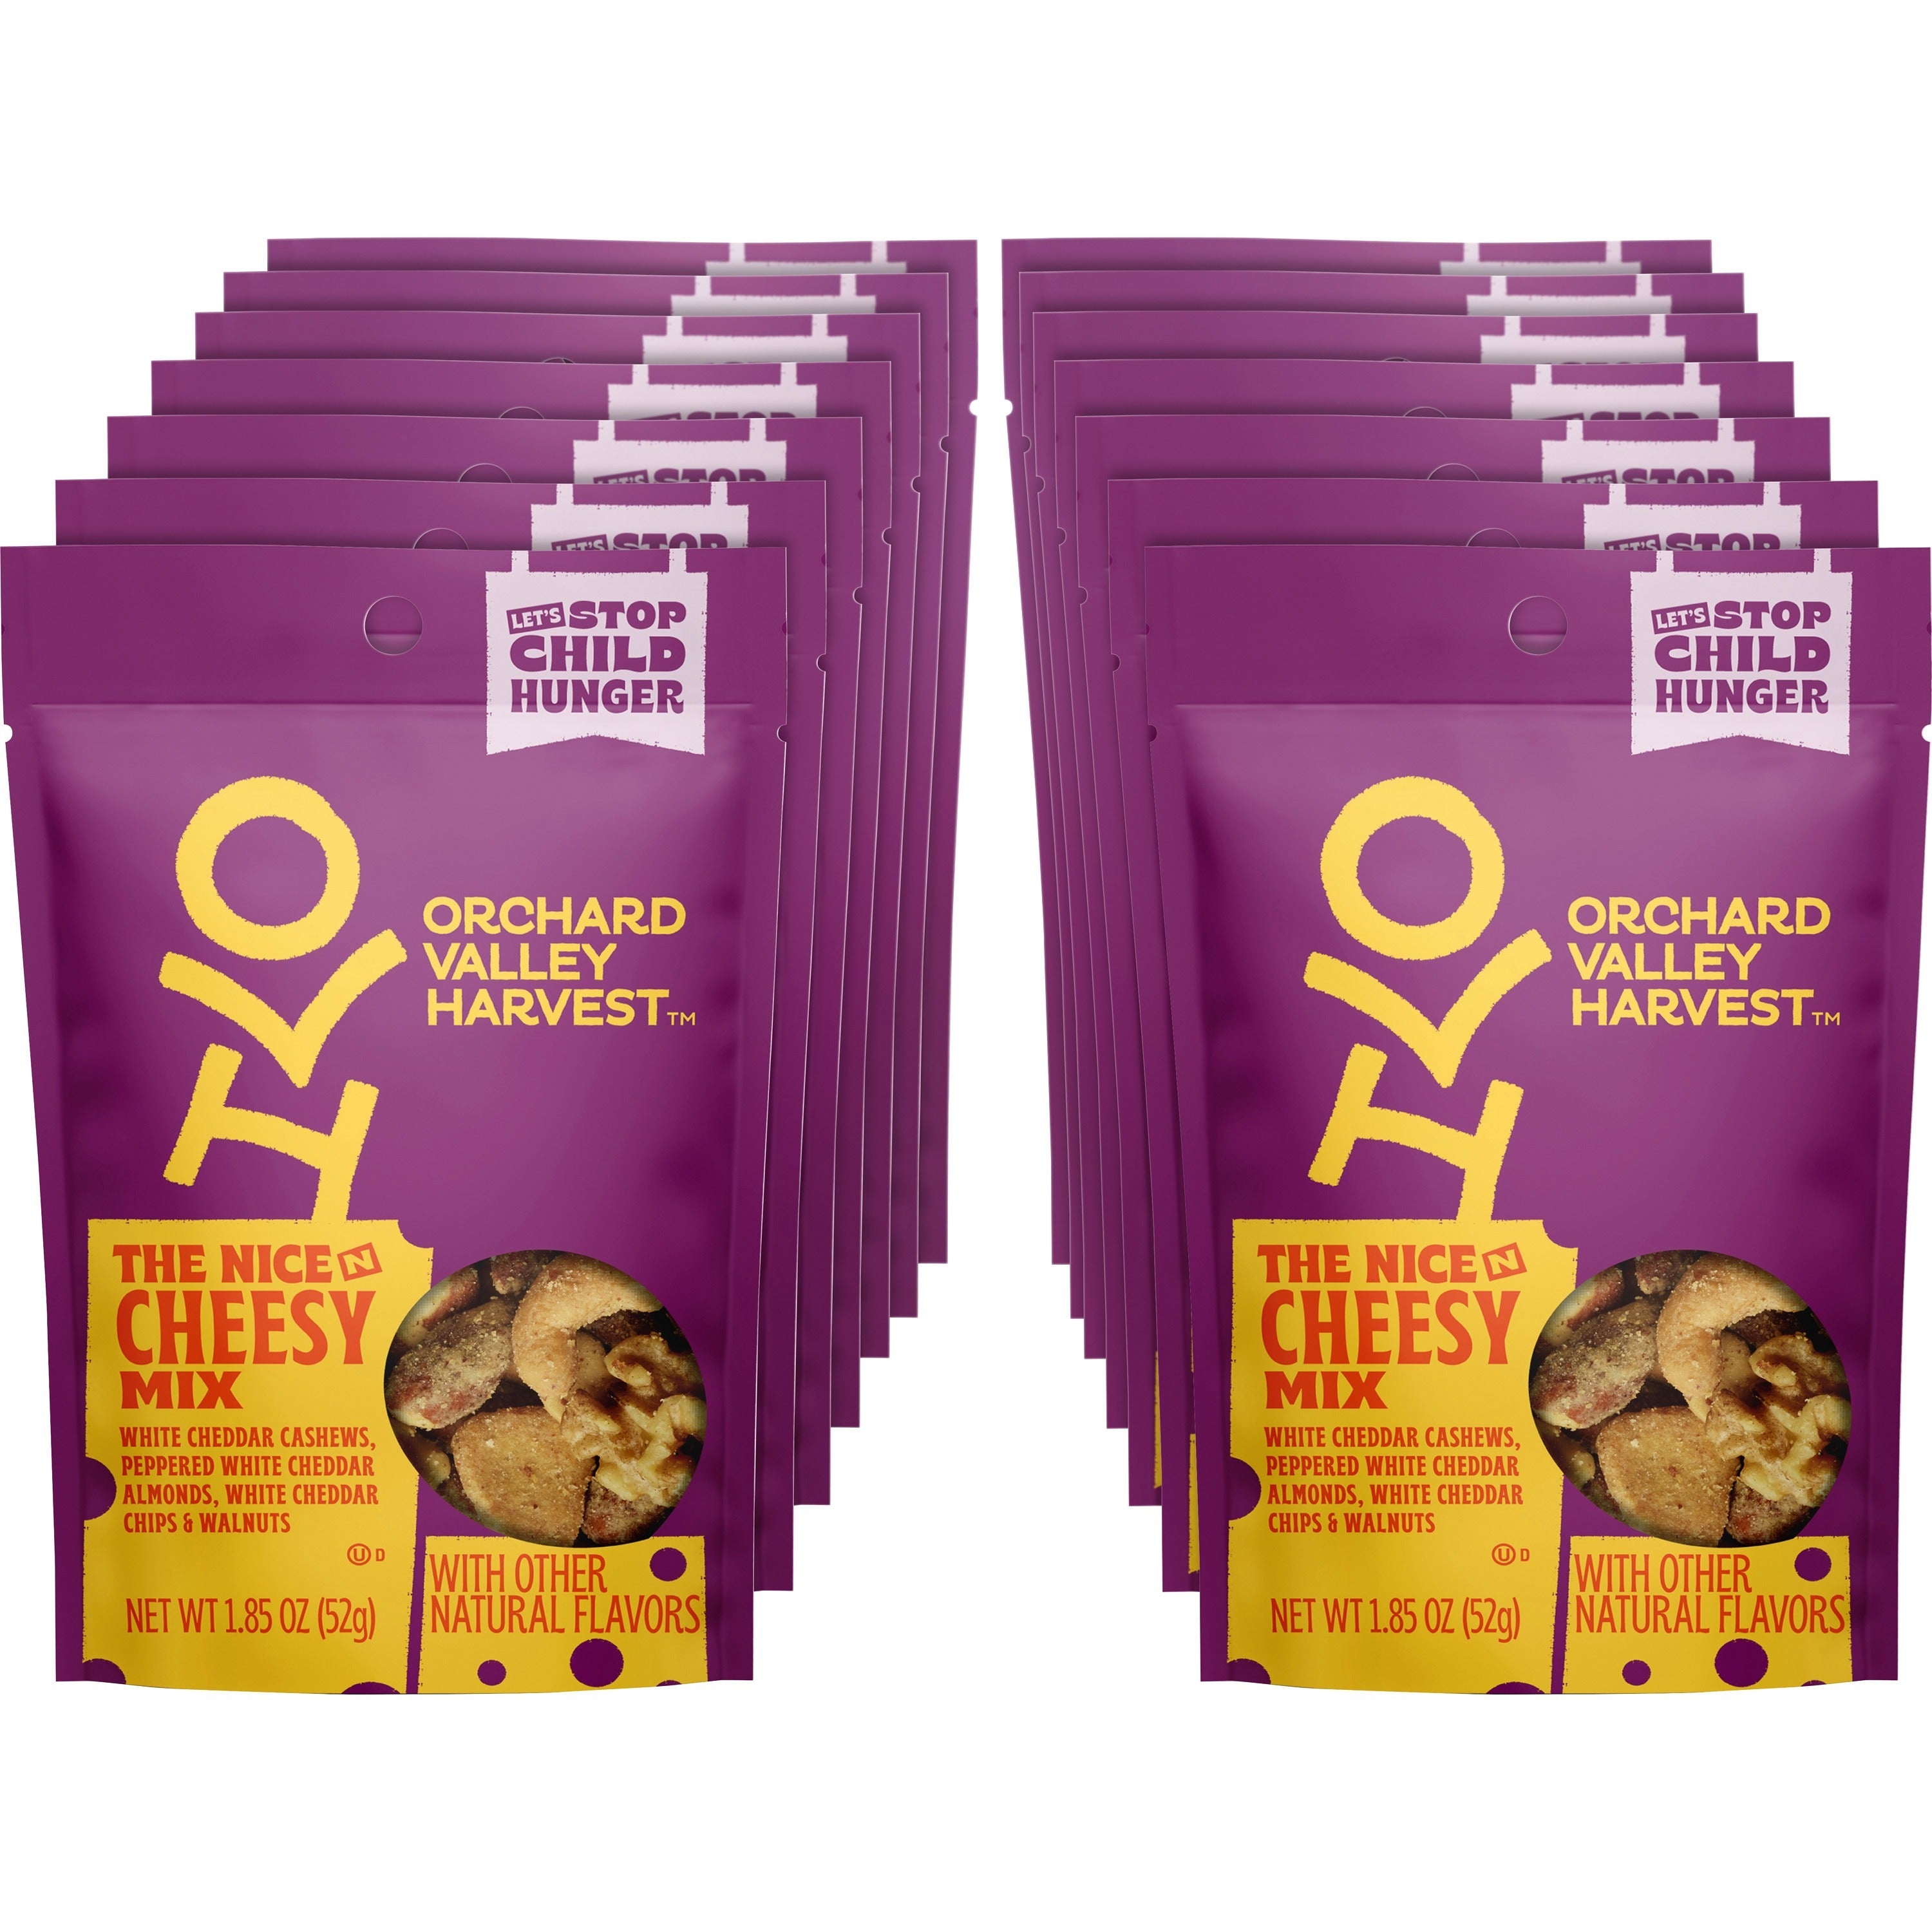 orchard-valley-harvest-nice-n-cheesy-mix-no-artificial-color-no-artificial-flavor-resealable-bag-crunch-cheese-cashew-white-cheddar-wheat-walnut-almond-1-serving-bag-185-oz-14-carton_jbsv14047 - 1